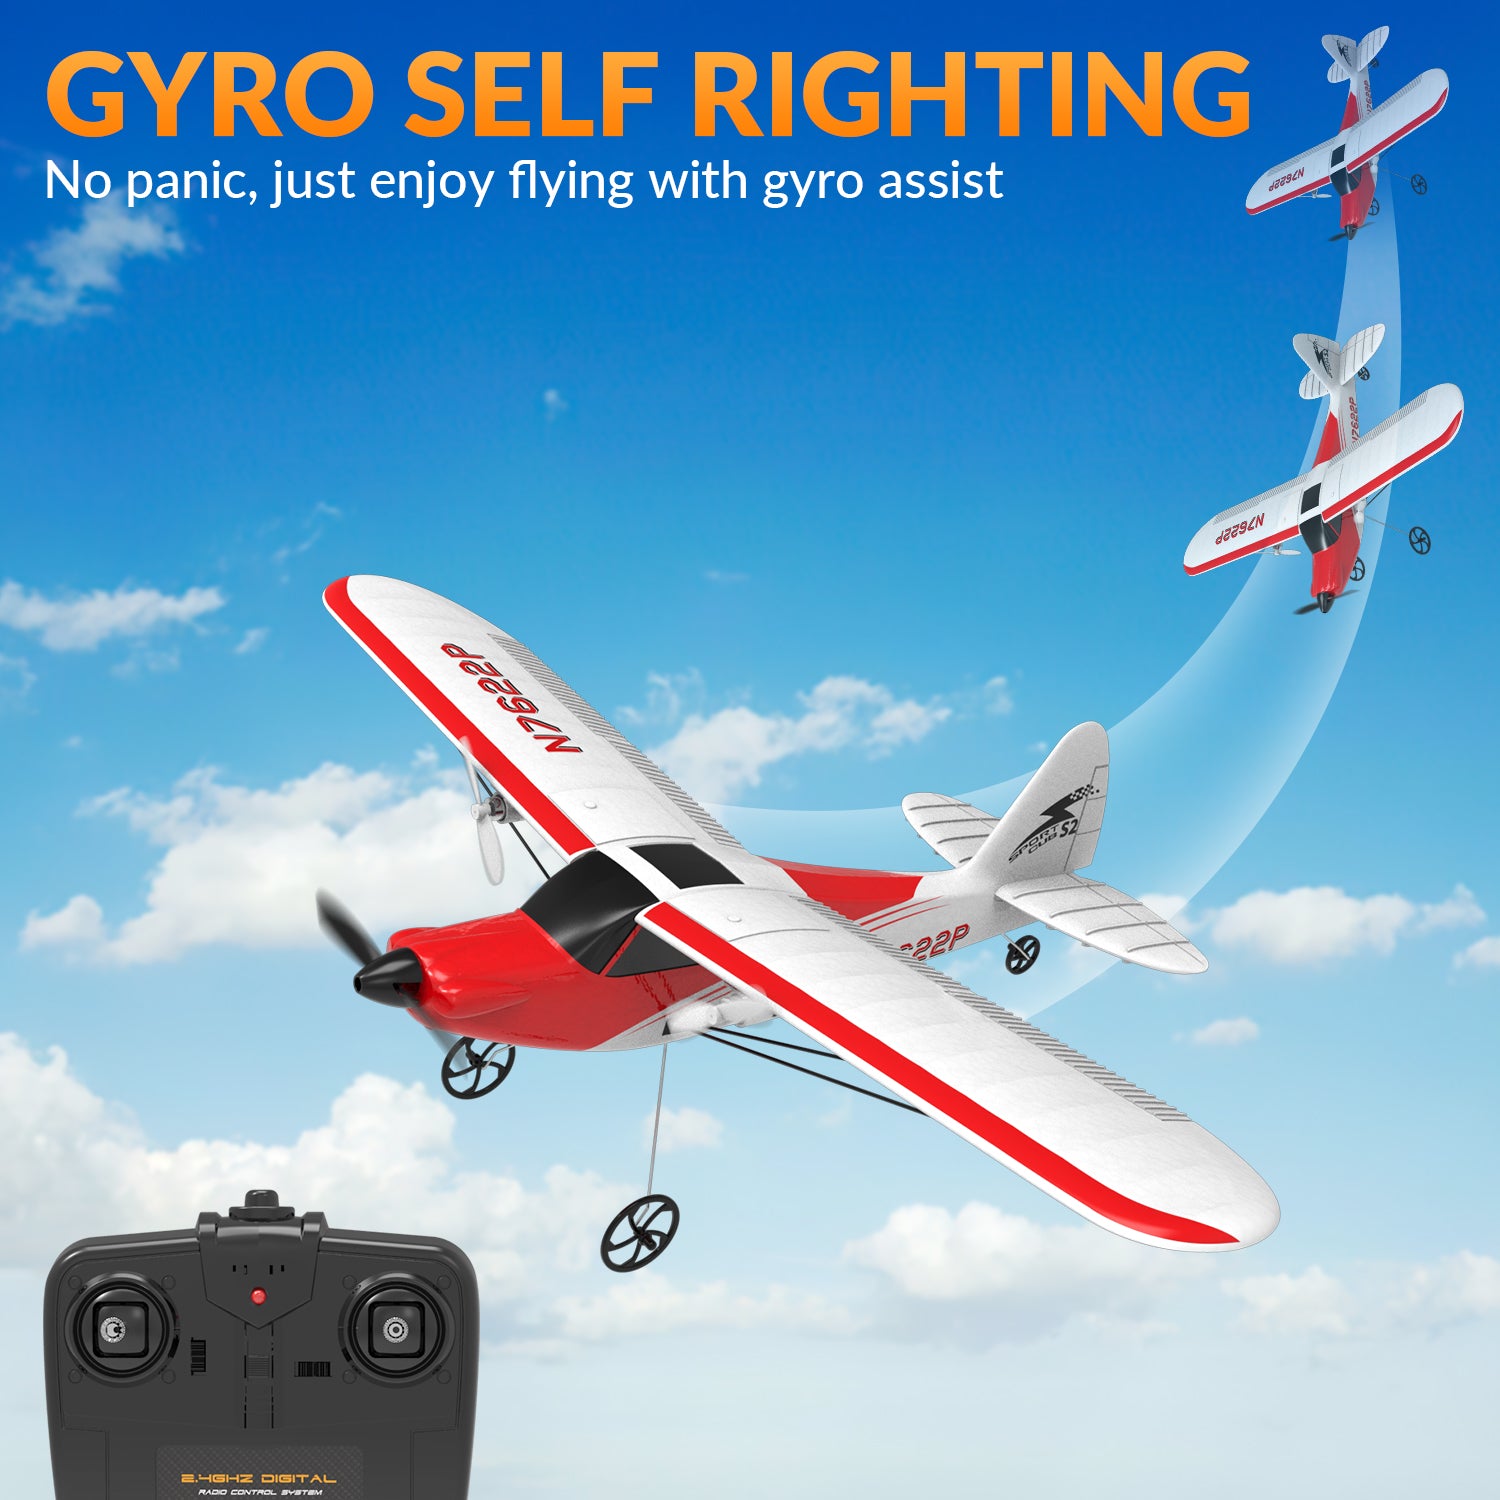 VOLANTEXRC Sport Cub S2 RC Plane with Gyro Stabilization System Ready to Fly for Beginners, 2.4Ghz 2-CH Remote Control Airplane RTF  (762-2)